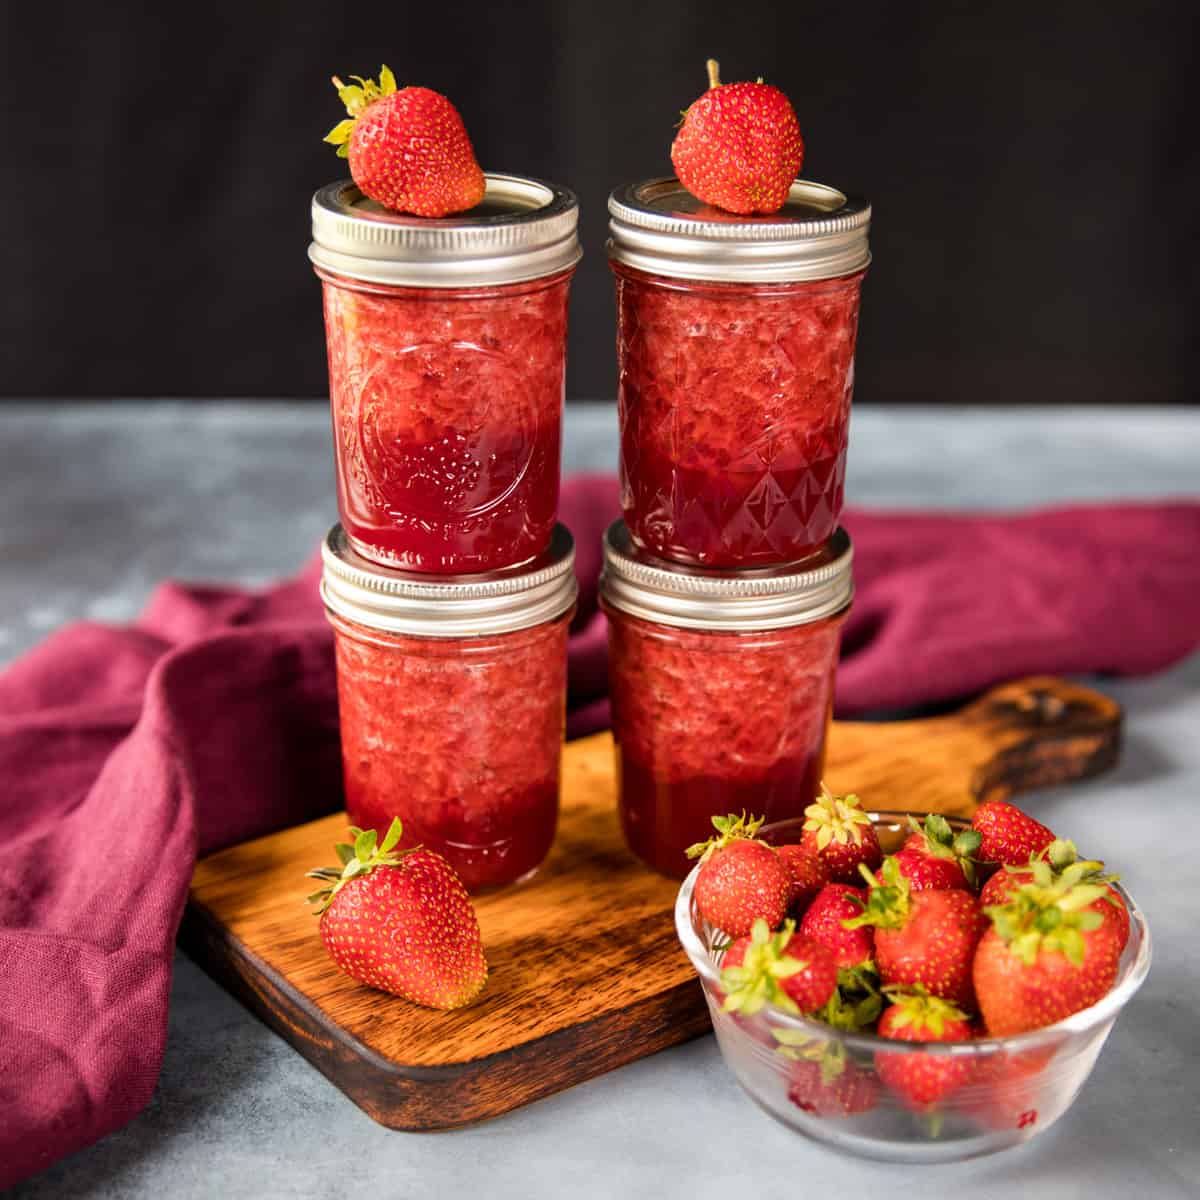 Two stacks of two jars of canned strawberry jam, with fresh strawberries on top, placed on a wooden cutting board. A bowl of fresh strawberries and a burgundy cloth surrounds.